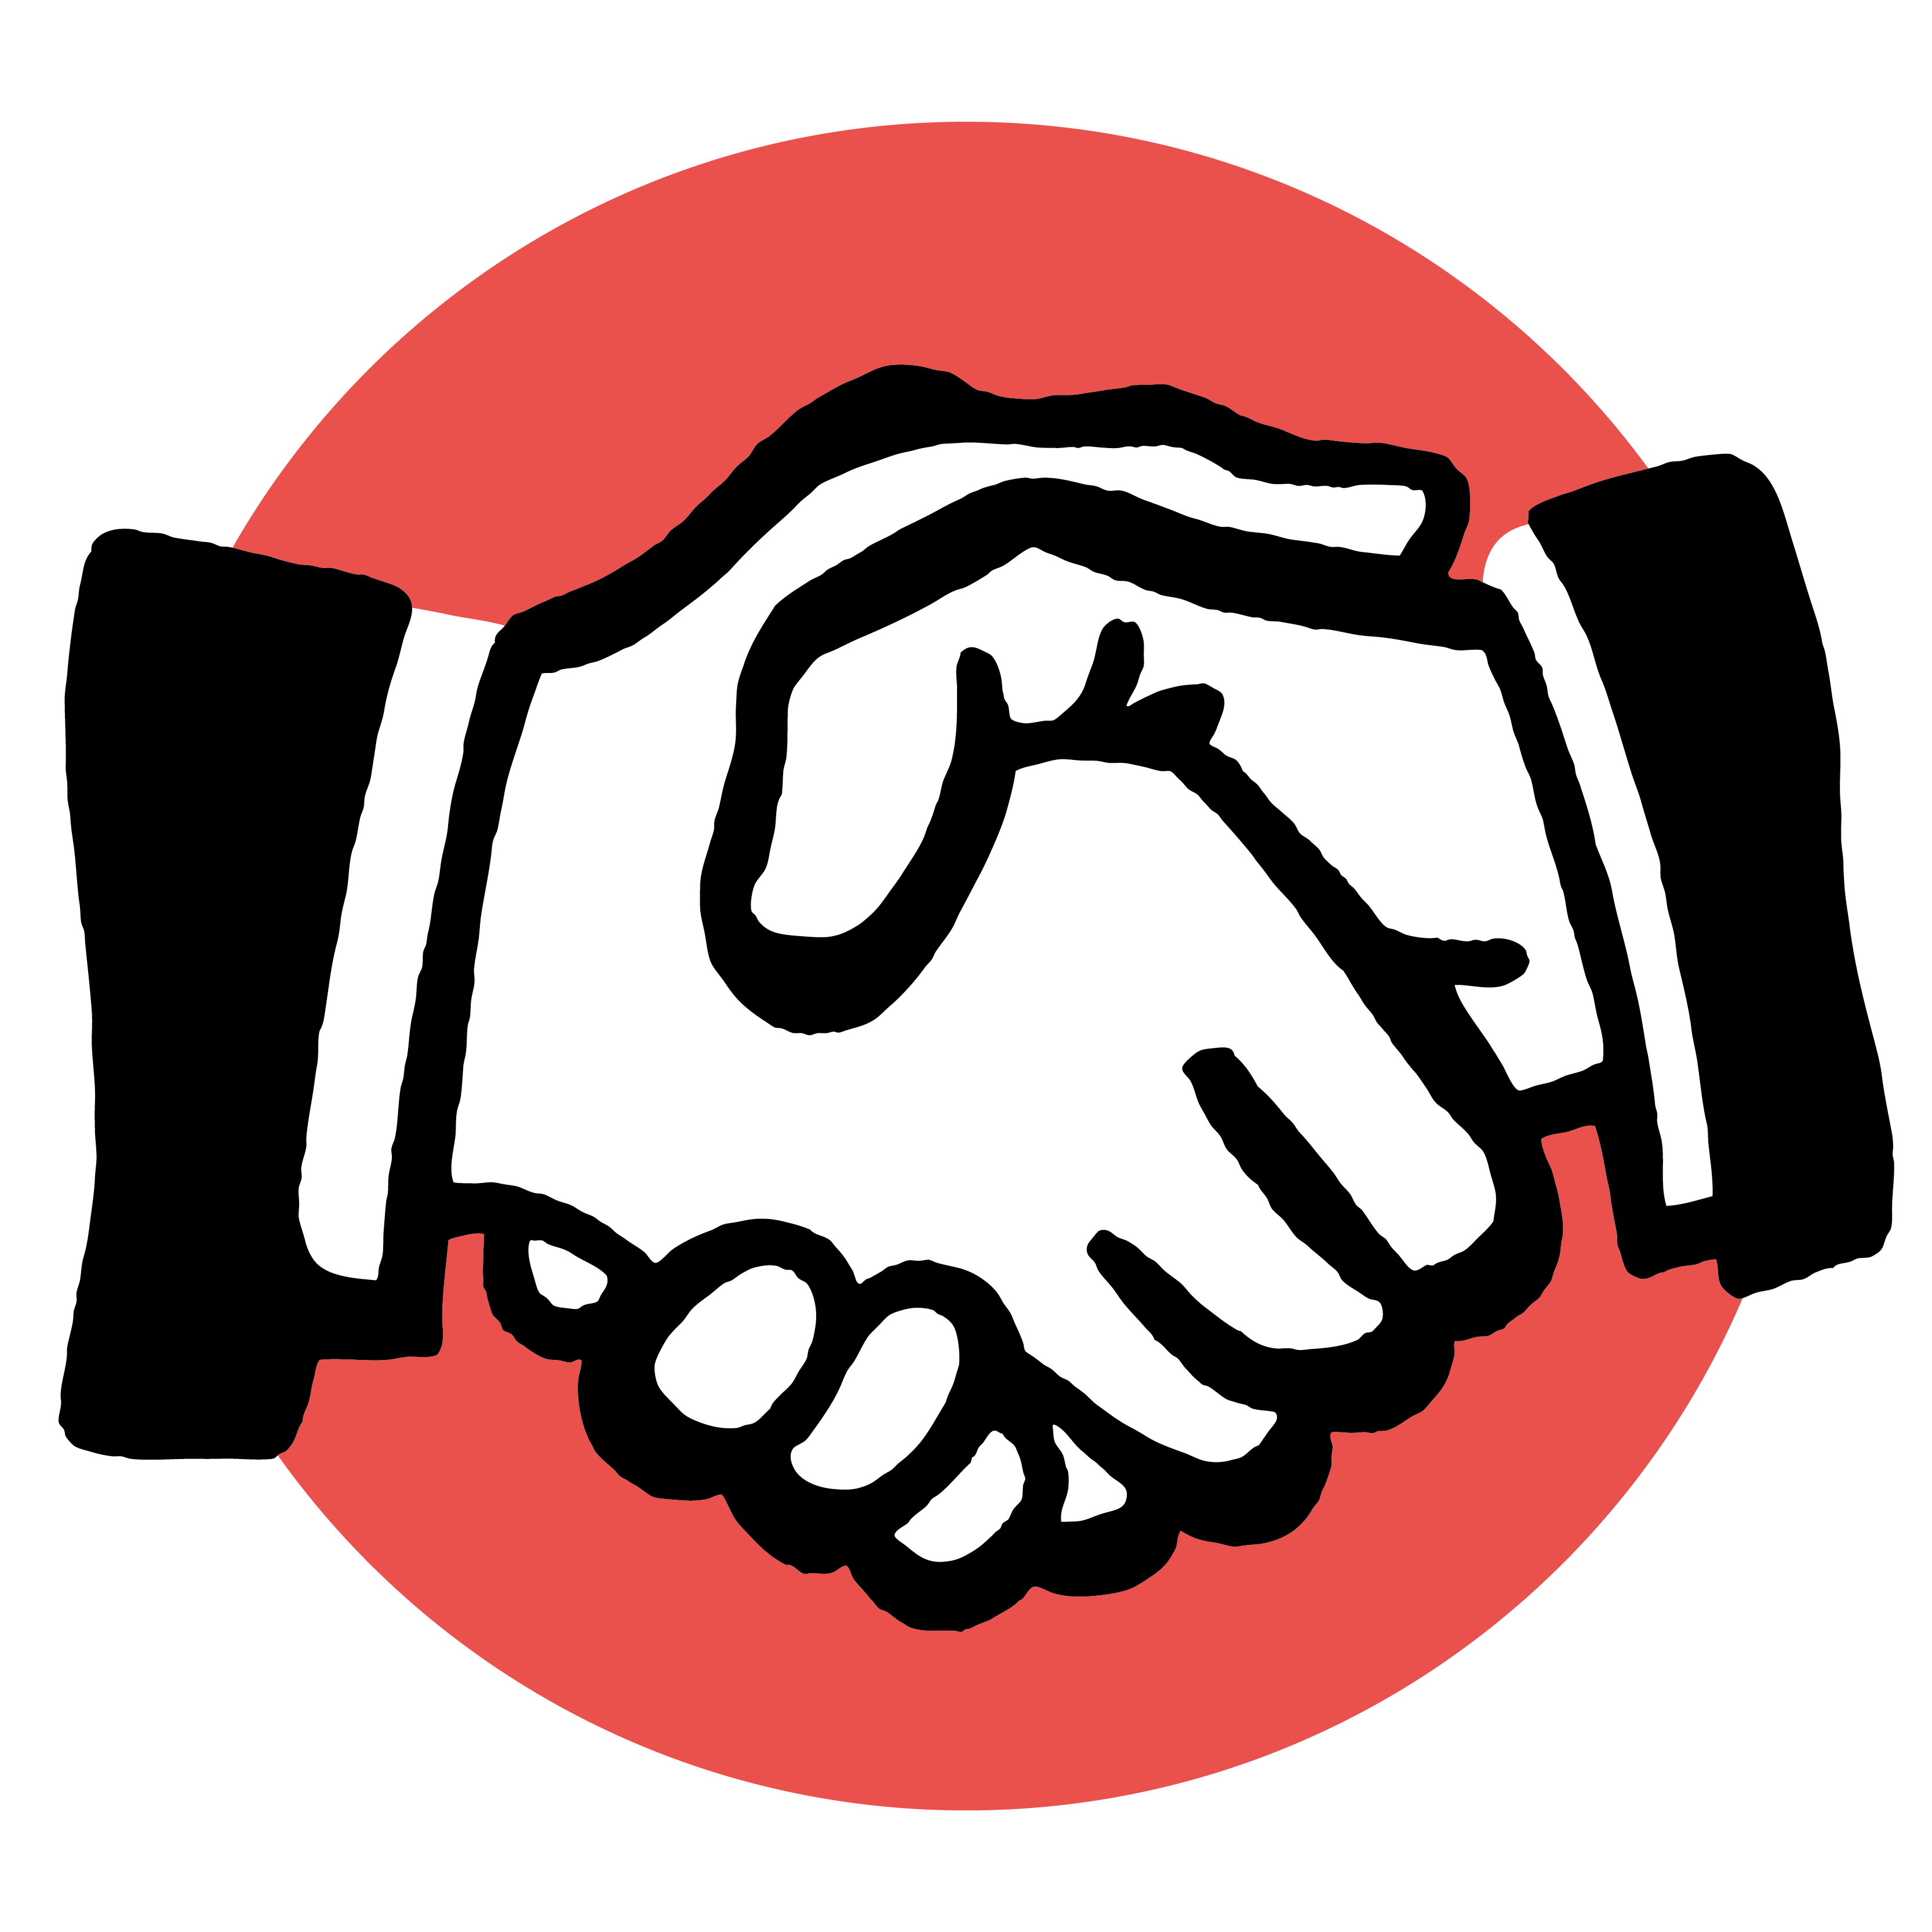 Stamp duty mobility and. Handshake clipart conflict